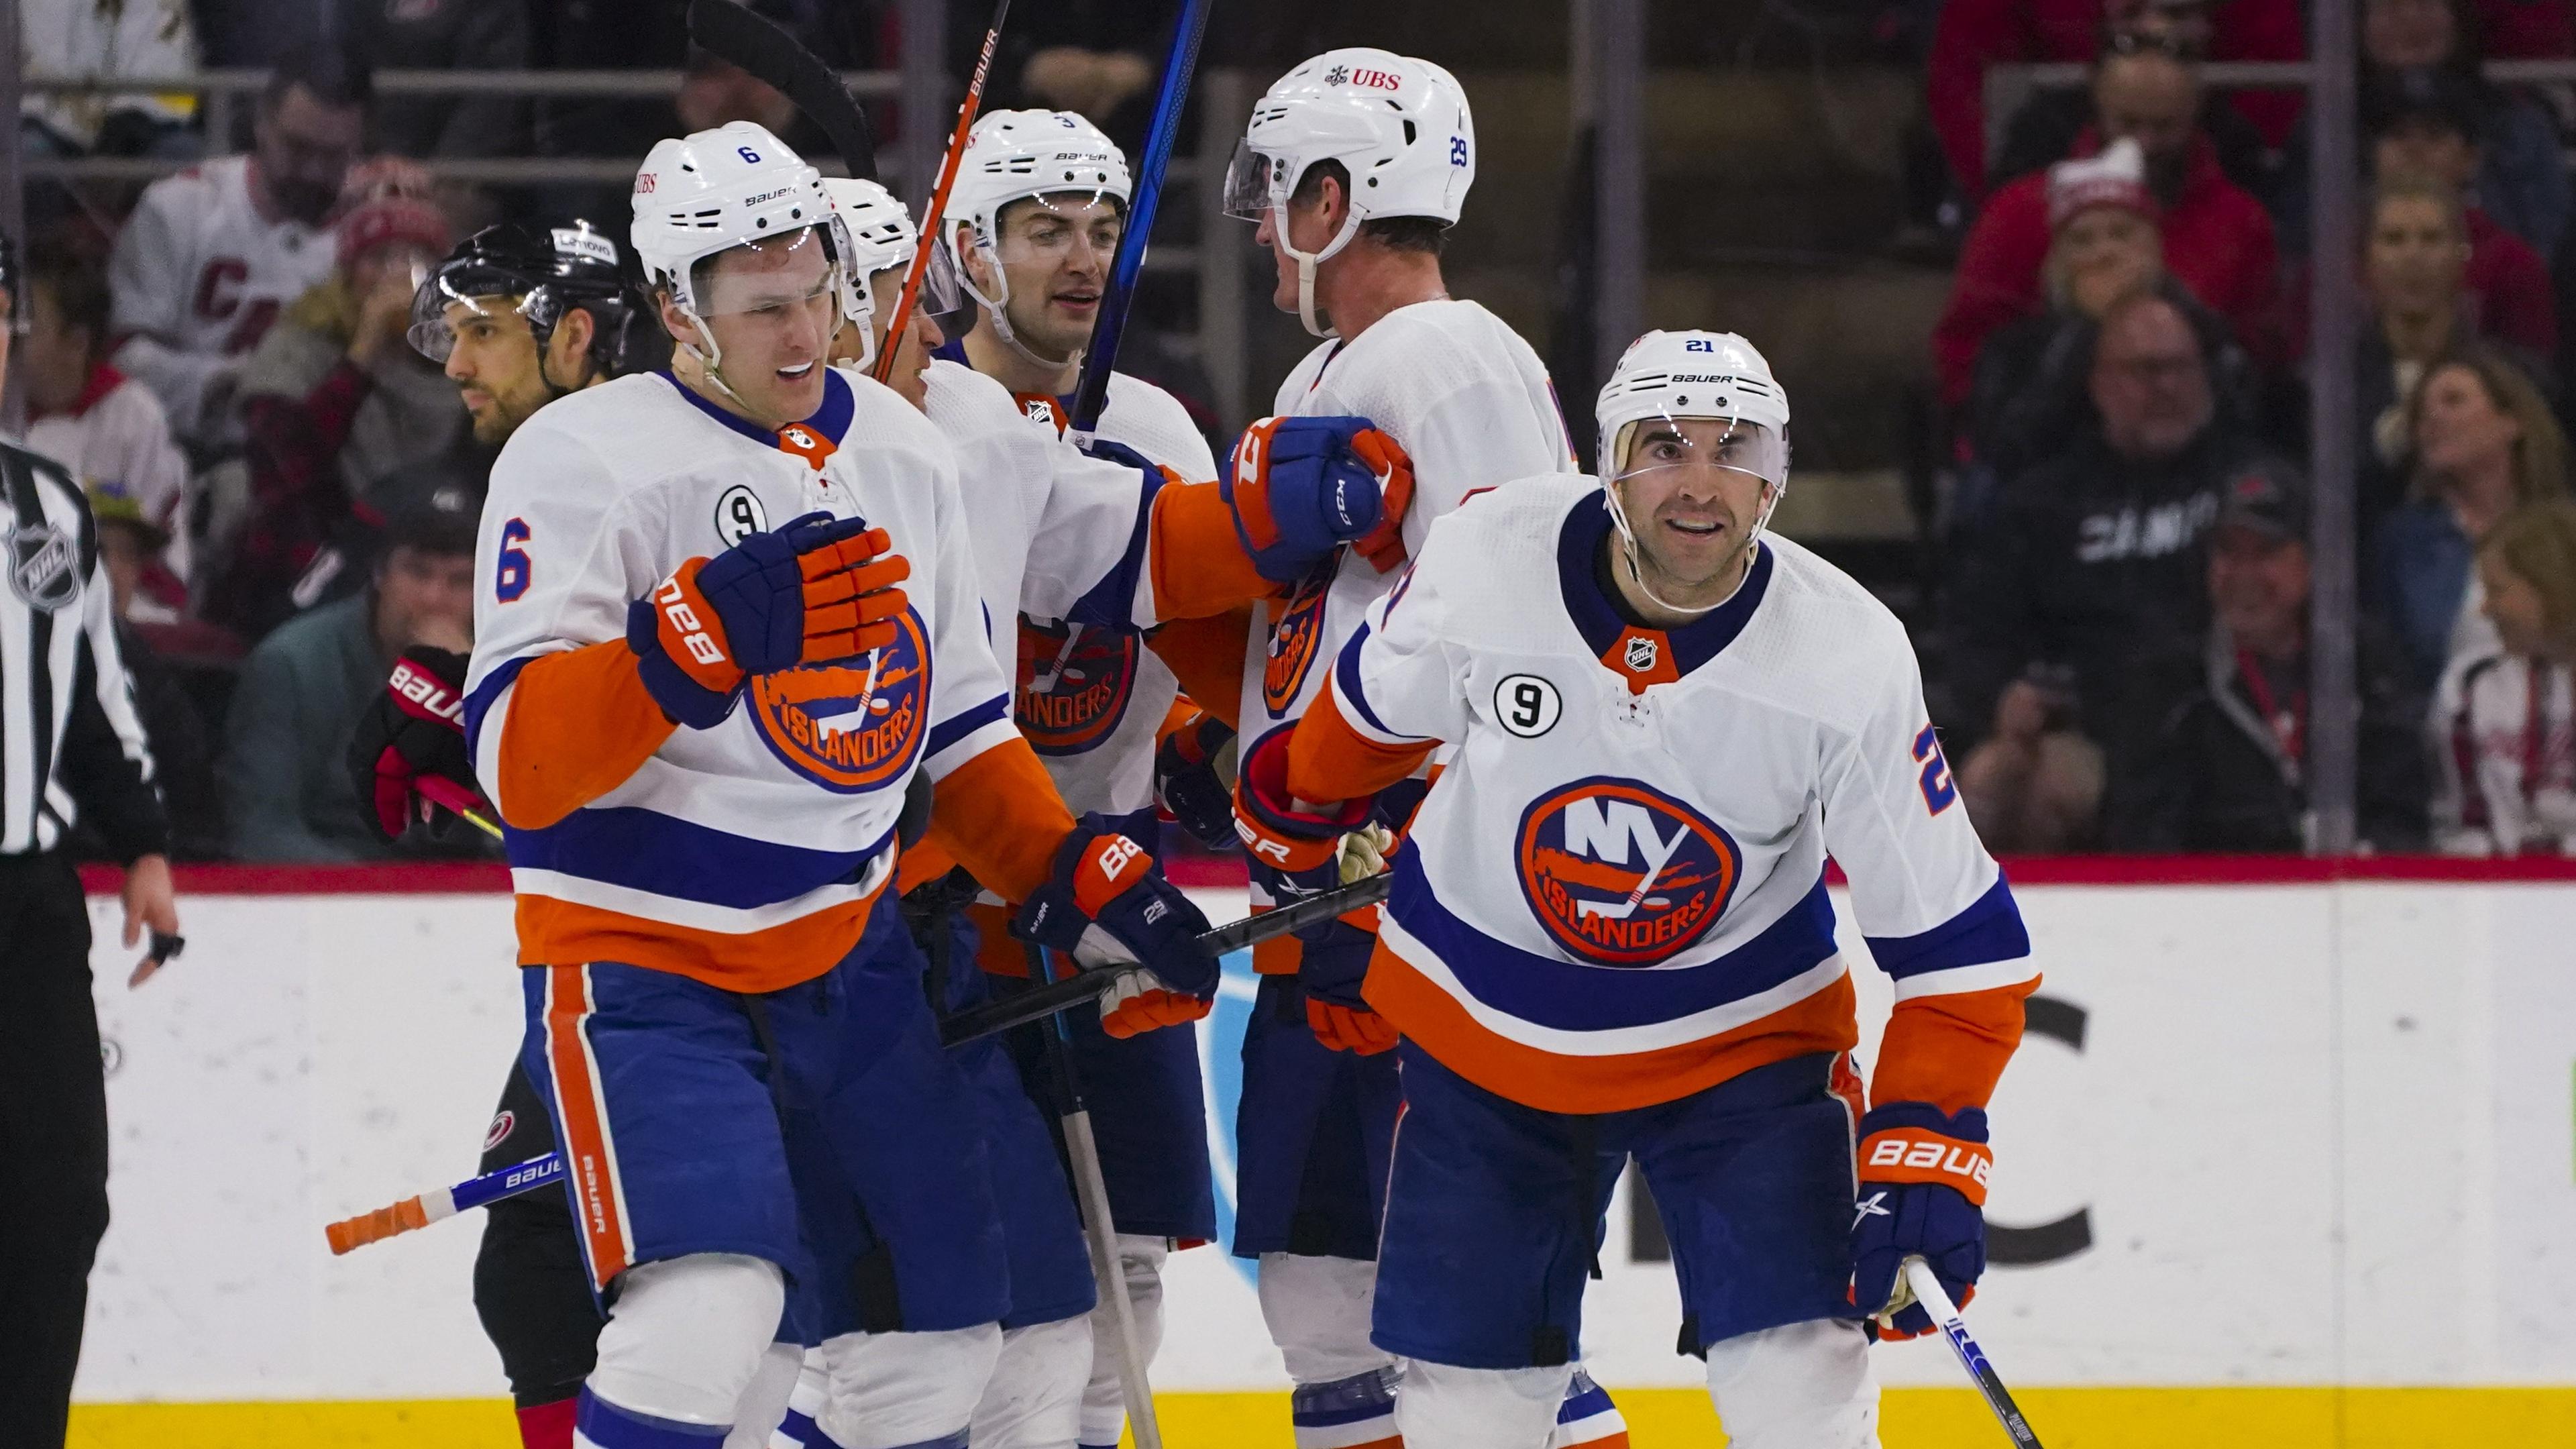 Apr 8, 2022; Raleigh, North Carolina, USA; New York Islanders right wing Kyle Palmieri (21) is congratulated by defenseman Ryan Pulock (6) center Brock Nelson (29) defenseman Adam Pelech (3) and left wing Zach Parise (11) after his goal against the Carolina Hurricanes during the third period at PNC Arena. Mandatory Credit: James Guillory-USA TODAY Sports / © James Guillory-USA TODAY Sports